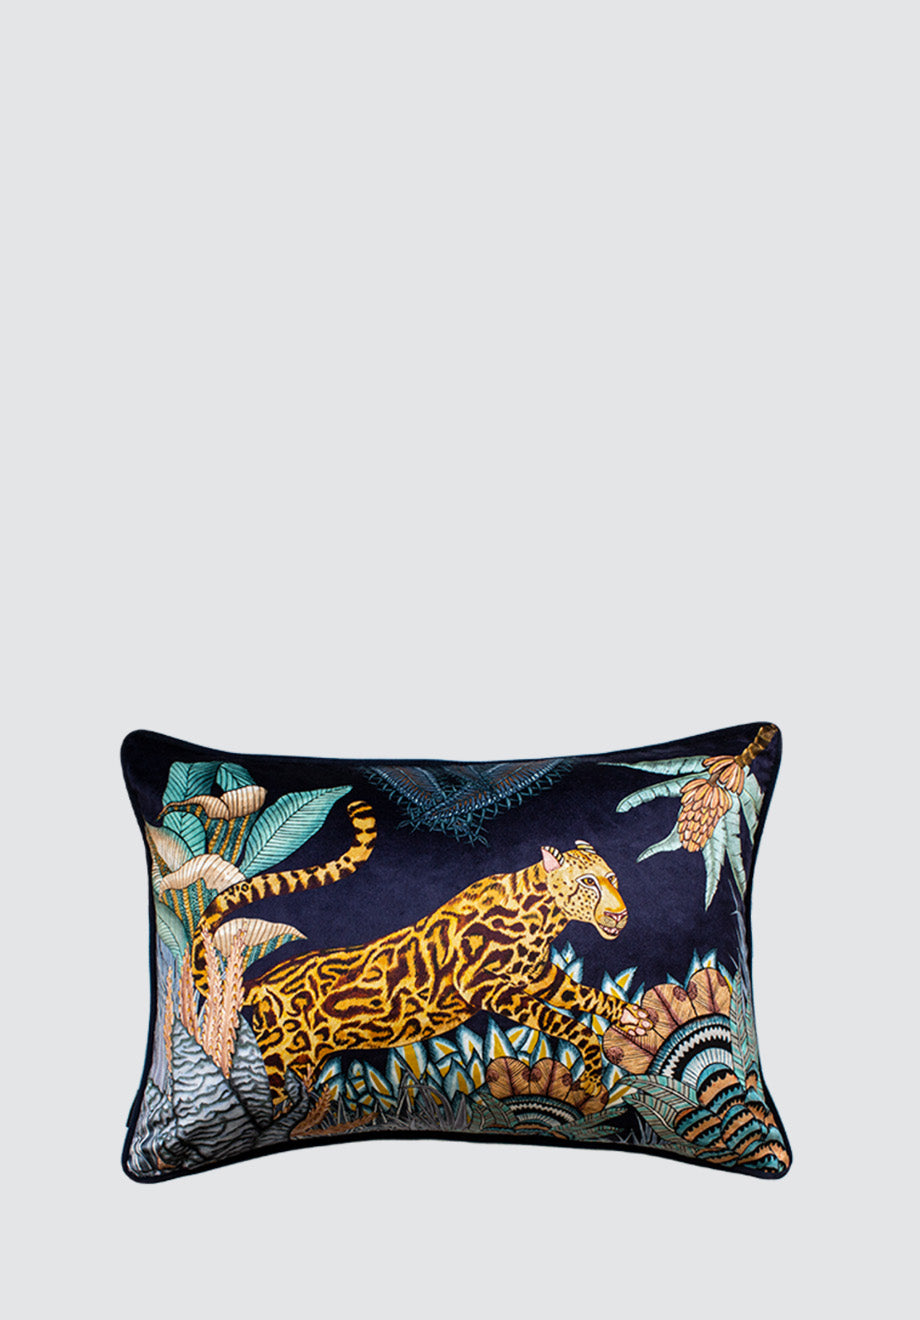 Cheetah Kings Forest | Tanzanite Velvet Cushion Cover with Piping